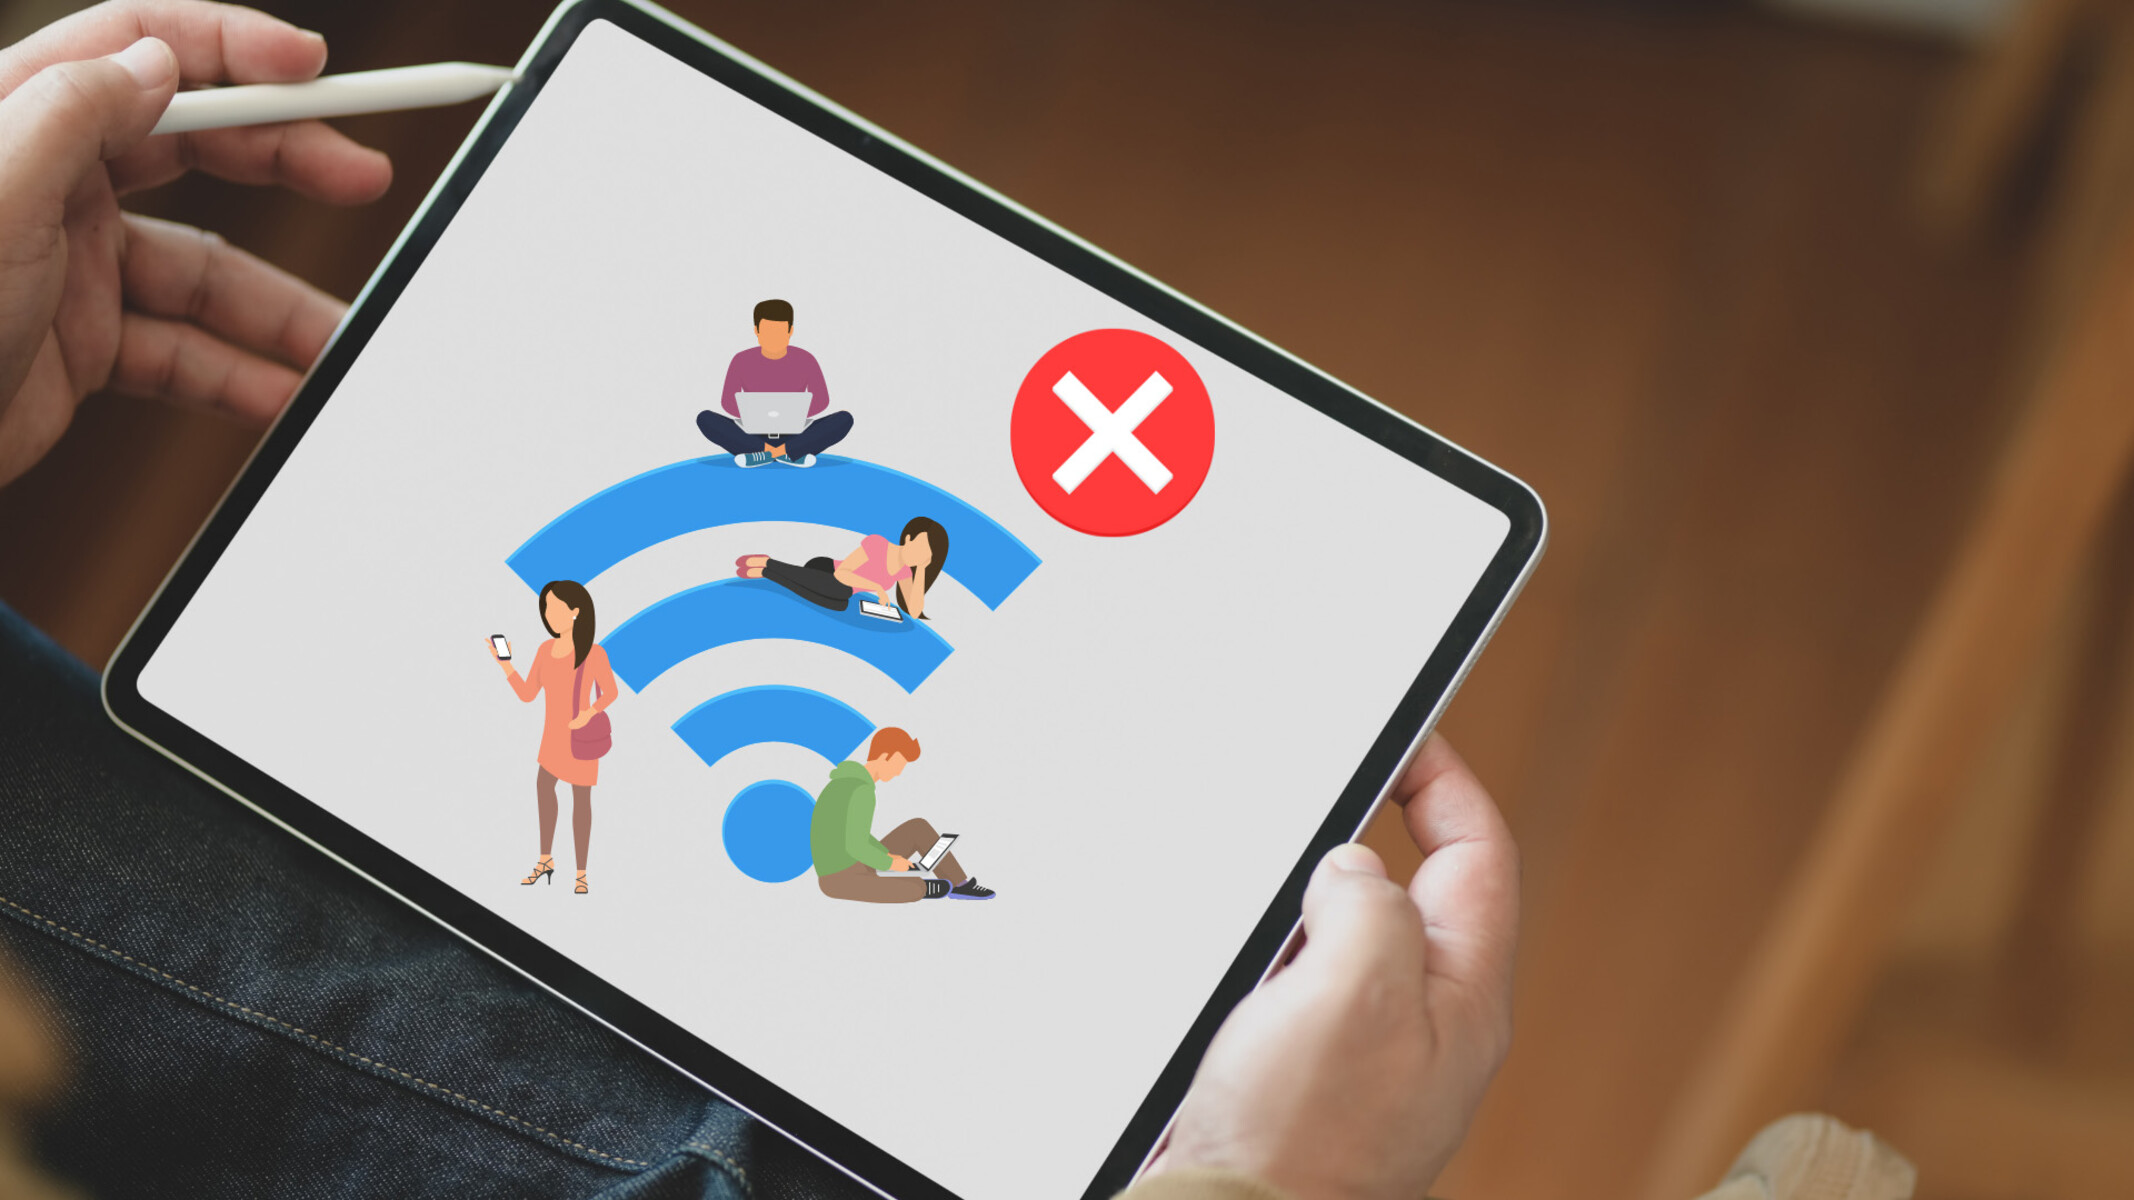 How To Connect IPad To Wireless Router